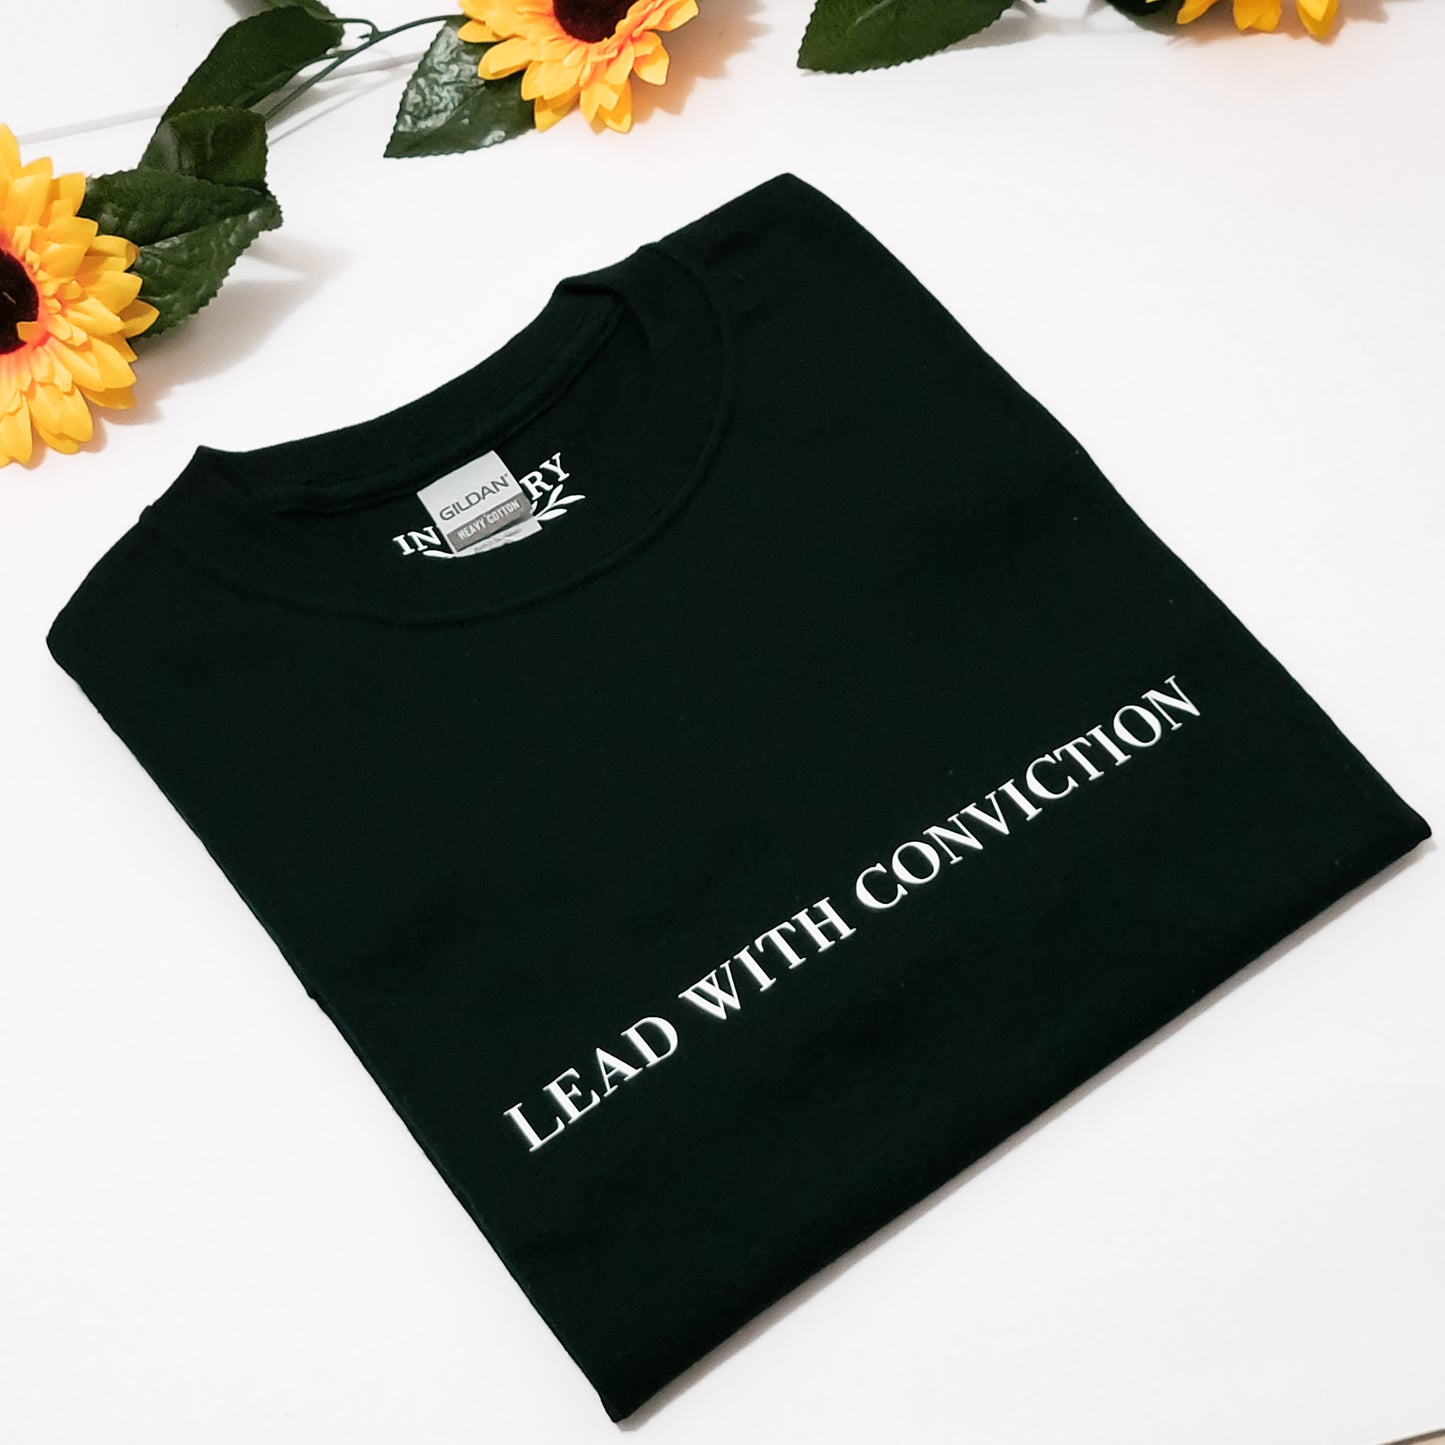 Lead With Conviction T-shirt